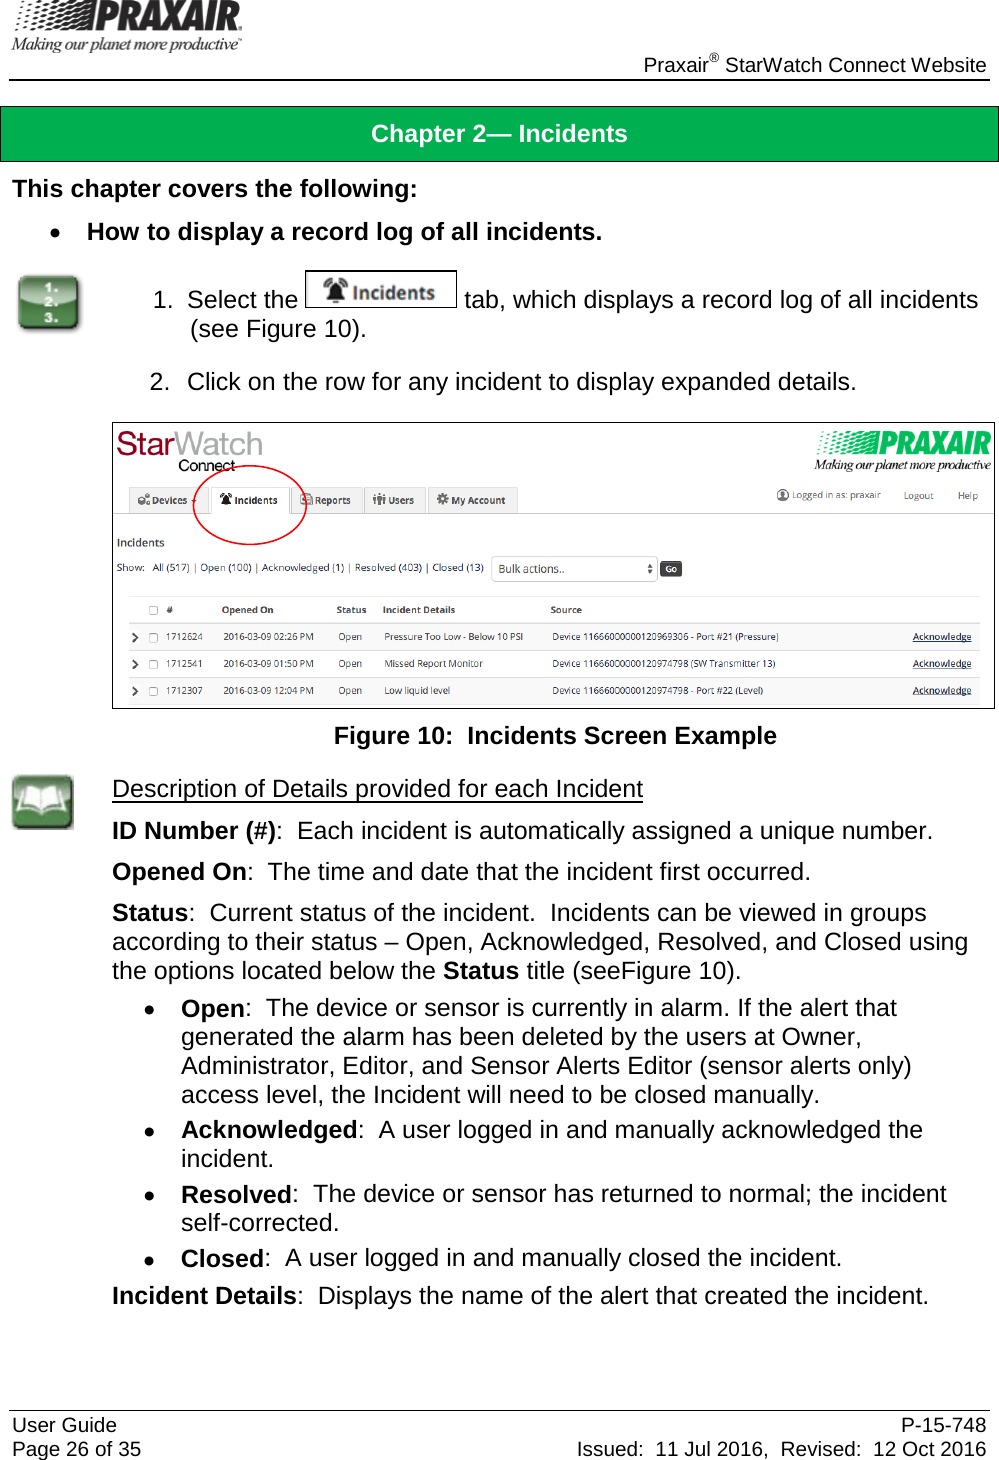    Praxair® StarWatch Connect Website User Guide  P-15-748 Page 26 of 35 Issued:  11 Jul 2016,  Revised:  12 Oct 2016 Chapter 2— Incidents This chapter covers the following: • How to display a record log of all incidents.  1. Select the   tab, which displays a record log of all incidents (see Figure 10).  2. Click on the row for any incident to display expanded details.   Figure 10:  Incidents Screen Example  Description of Details provided for each Incident ID Number (#):  Each incident is automatically assigned a unique number. Opened On:  The time and date that the incident first occurred. Status:  Current status of the incident.  Incidents can be viewed in groups according to their status – Open, Acknowledged, Resolved, and Closed using the options located below the Status title (seeFigure 10). • Open:  The device or sensor is currently in alarm. If the alert that generated the alarm has been deleted by the users at Owner, Administrator, Editor, and Sensor Alerts Editor (sensor alerts only) access level, the Incident will need to be closed manually. • Acknowledged:  A user logged in and manually acknowledged the incident. • Resolved:  The device or sensor has returned to normal; the incident self-corrected. • Closed:  A user logged in and manually closed the incident.  Incident Details:  Displays the name of the alert that created the incident.  